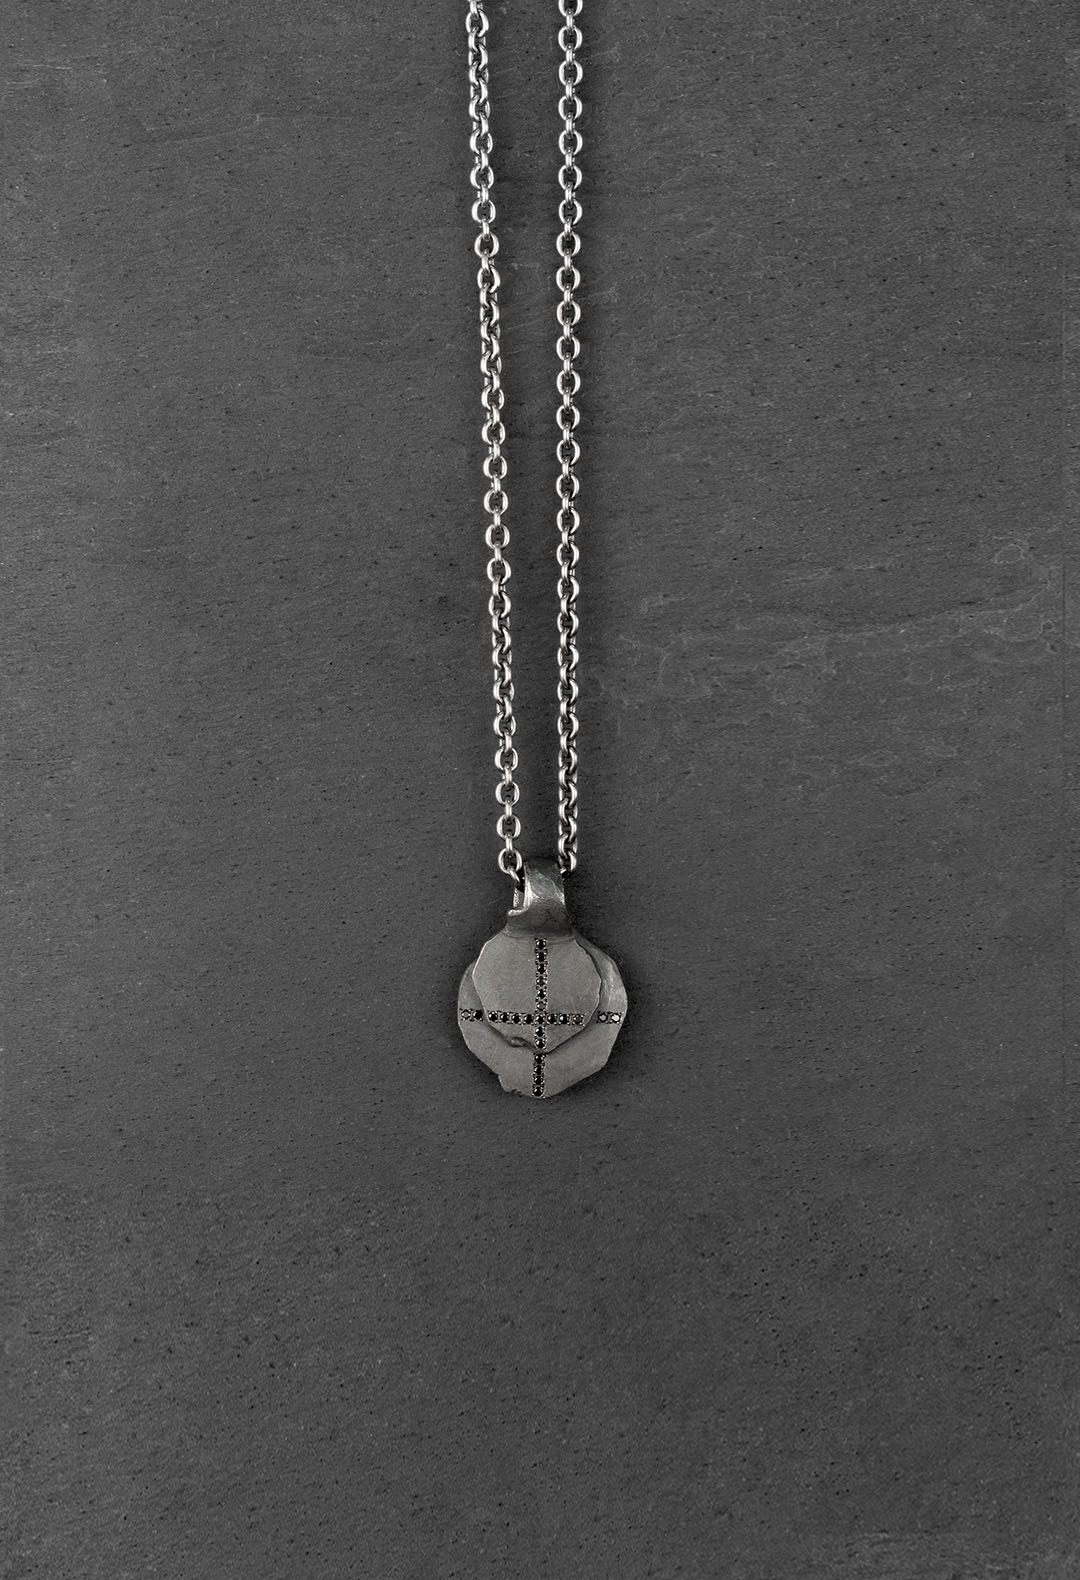 Cross arion necklace